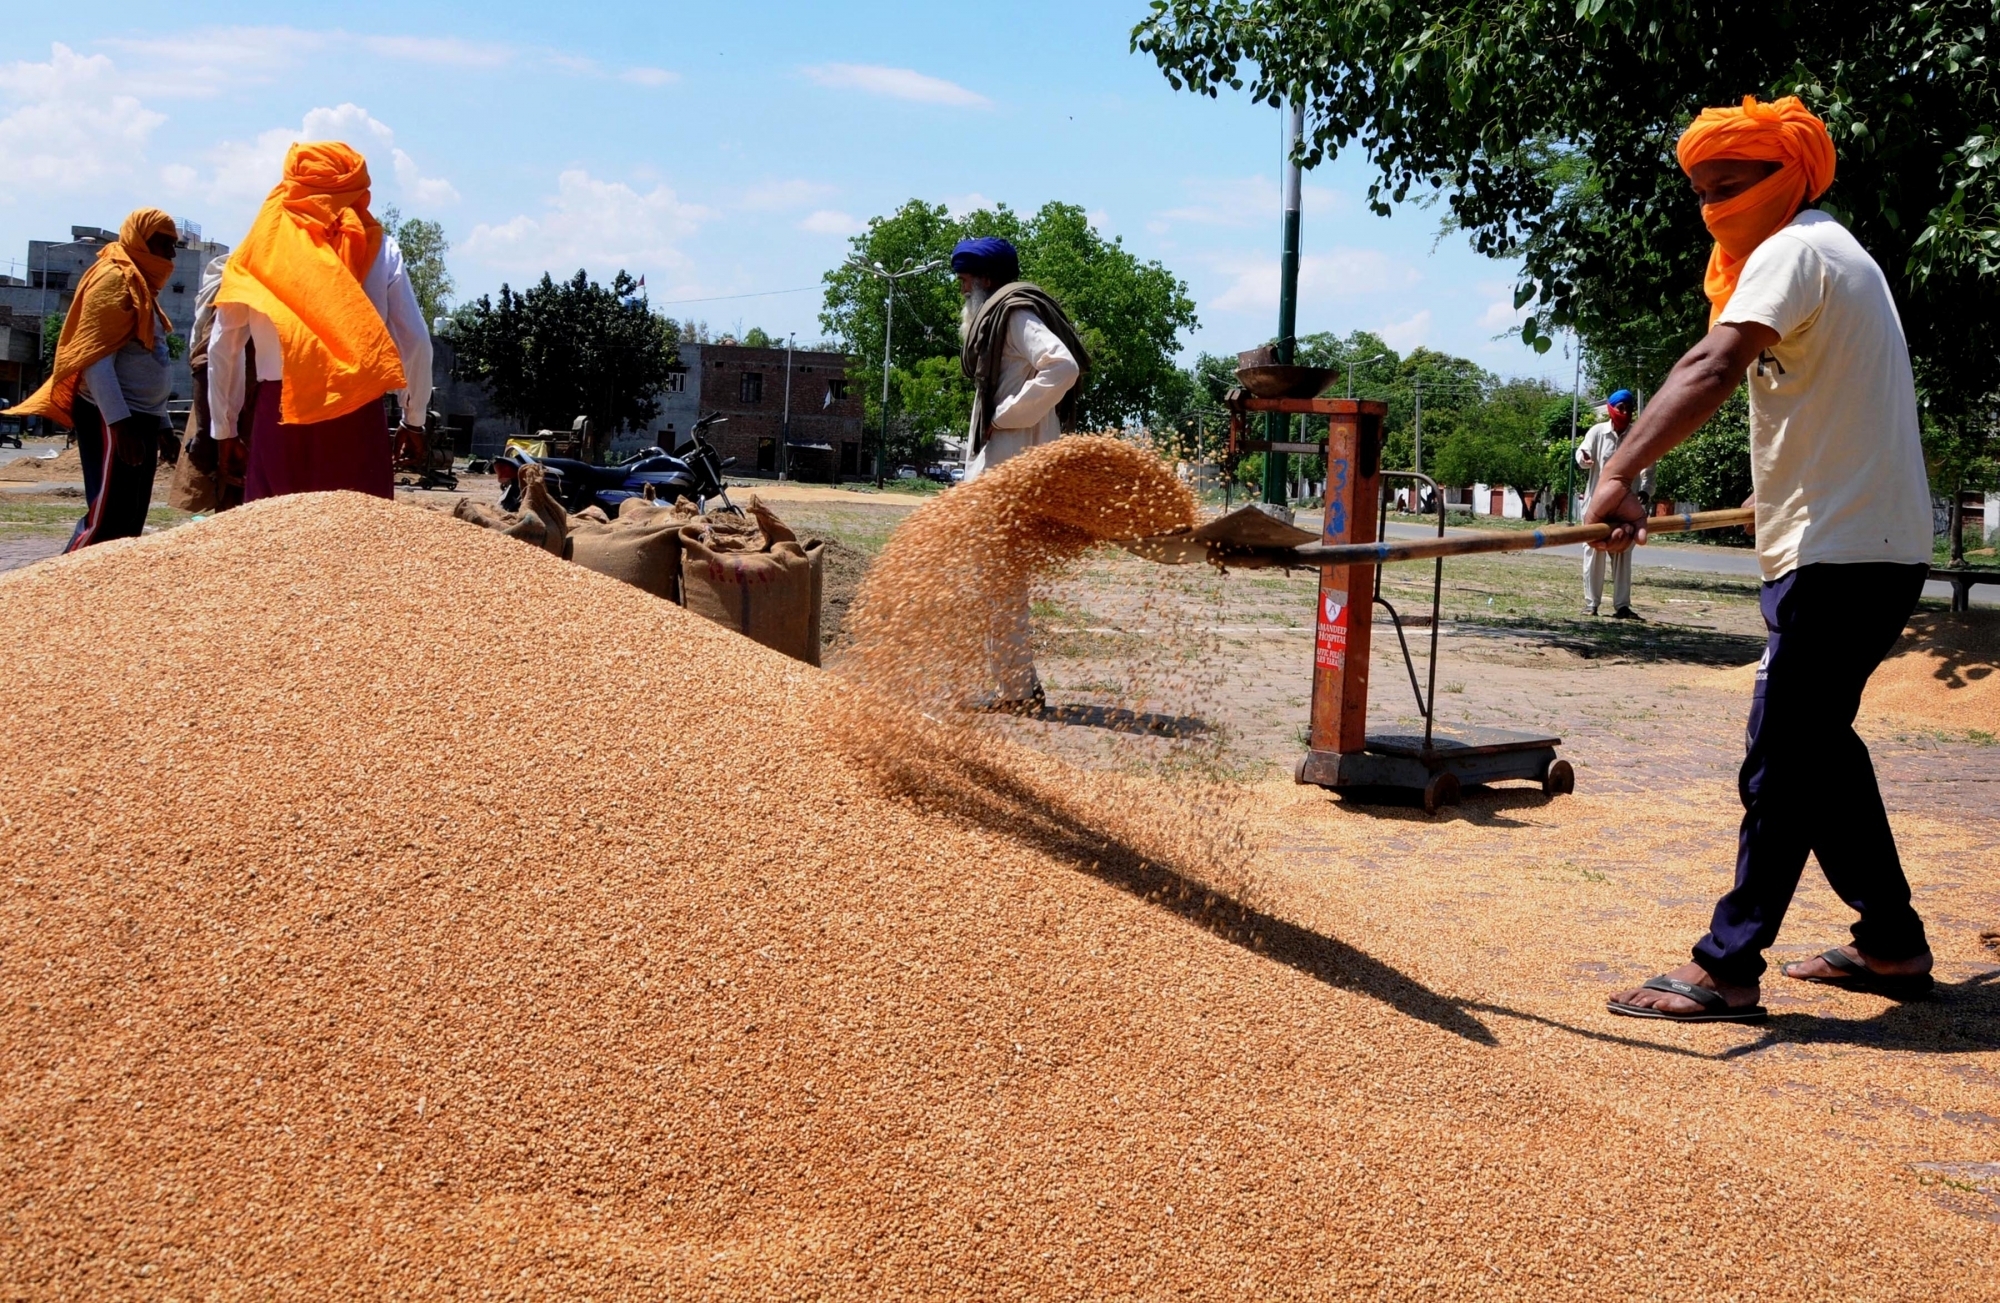 Production of wheat expected to be at record 115 million tonnes: IIWBR